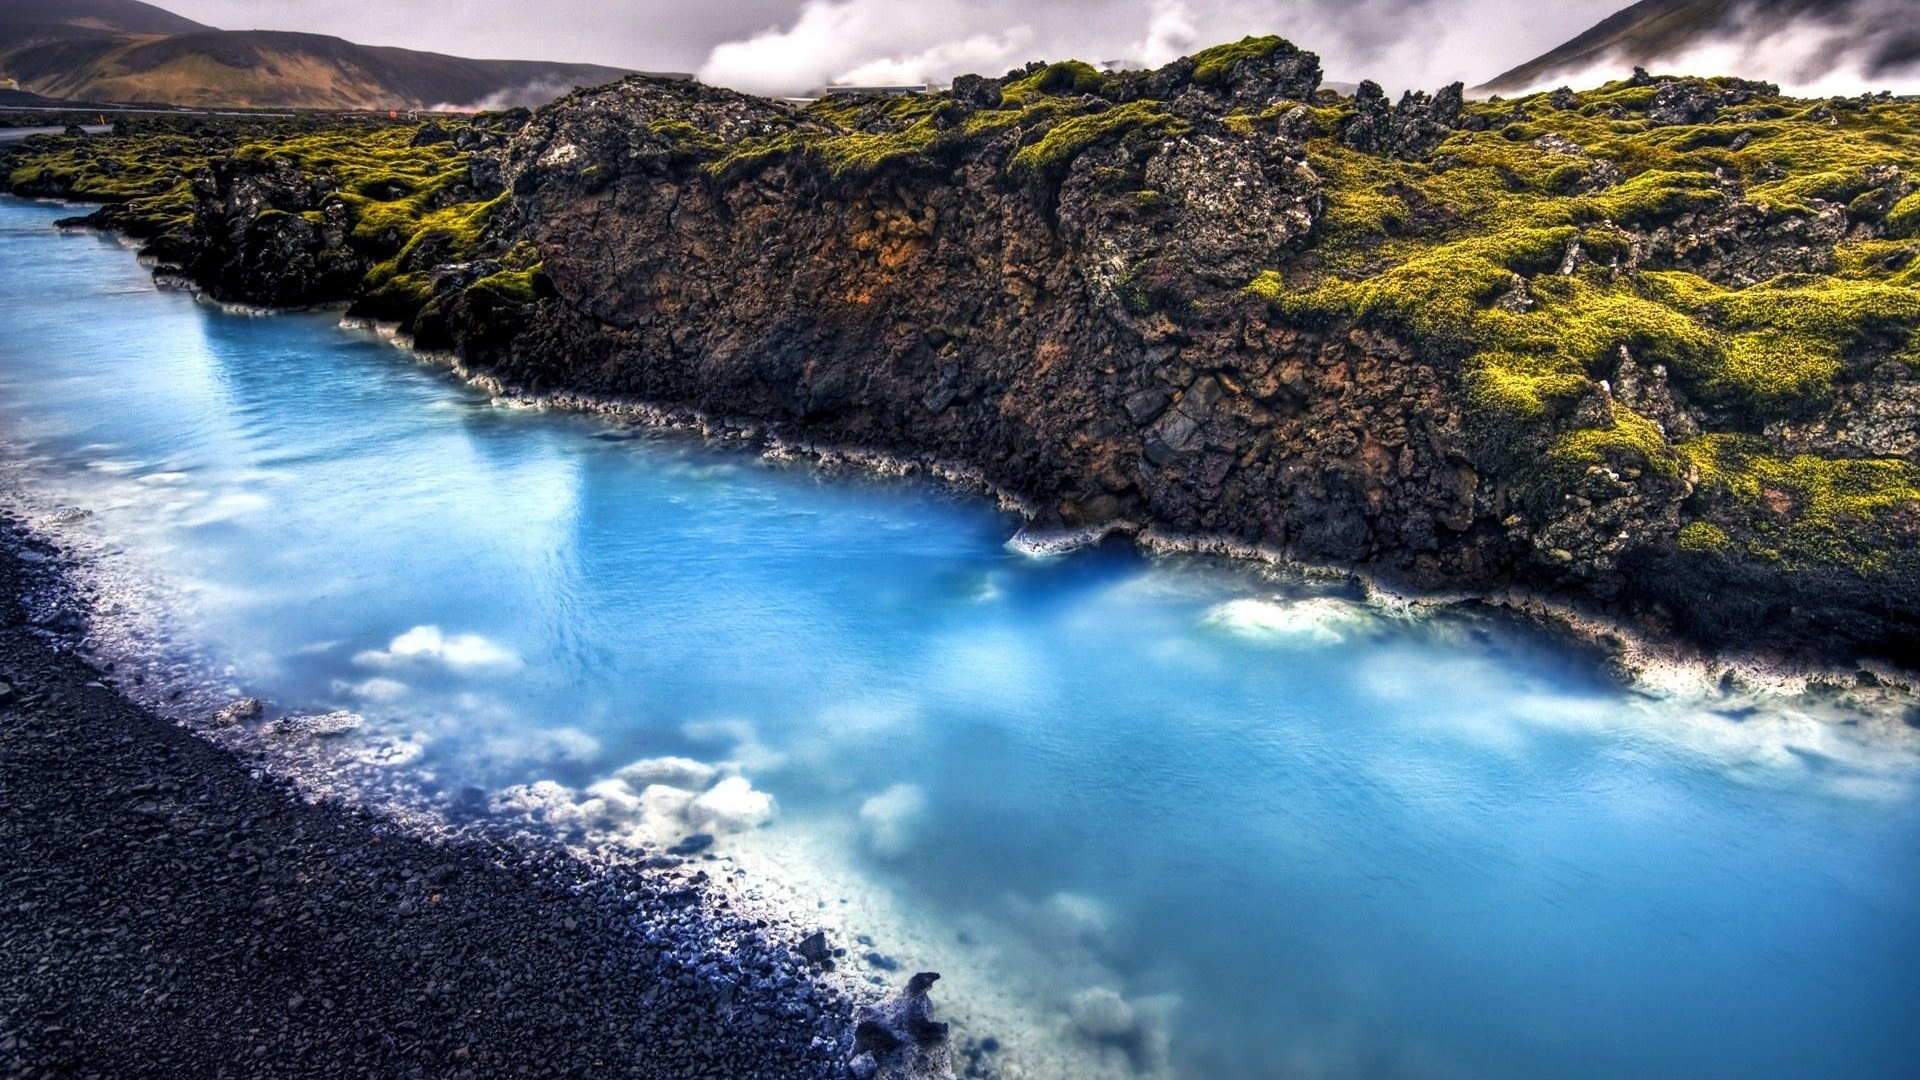 Iceland Landscape the Blue Calcite Stream Near the Geothermal for 1920 x 1080 HDTV 1080p resolution